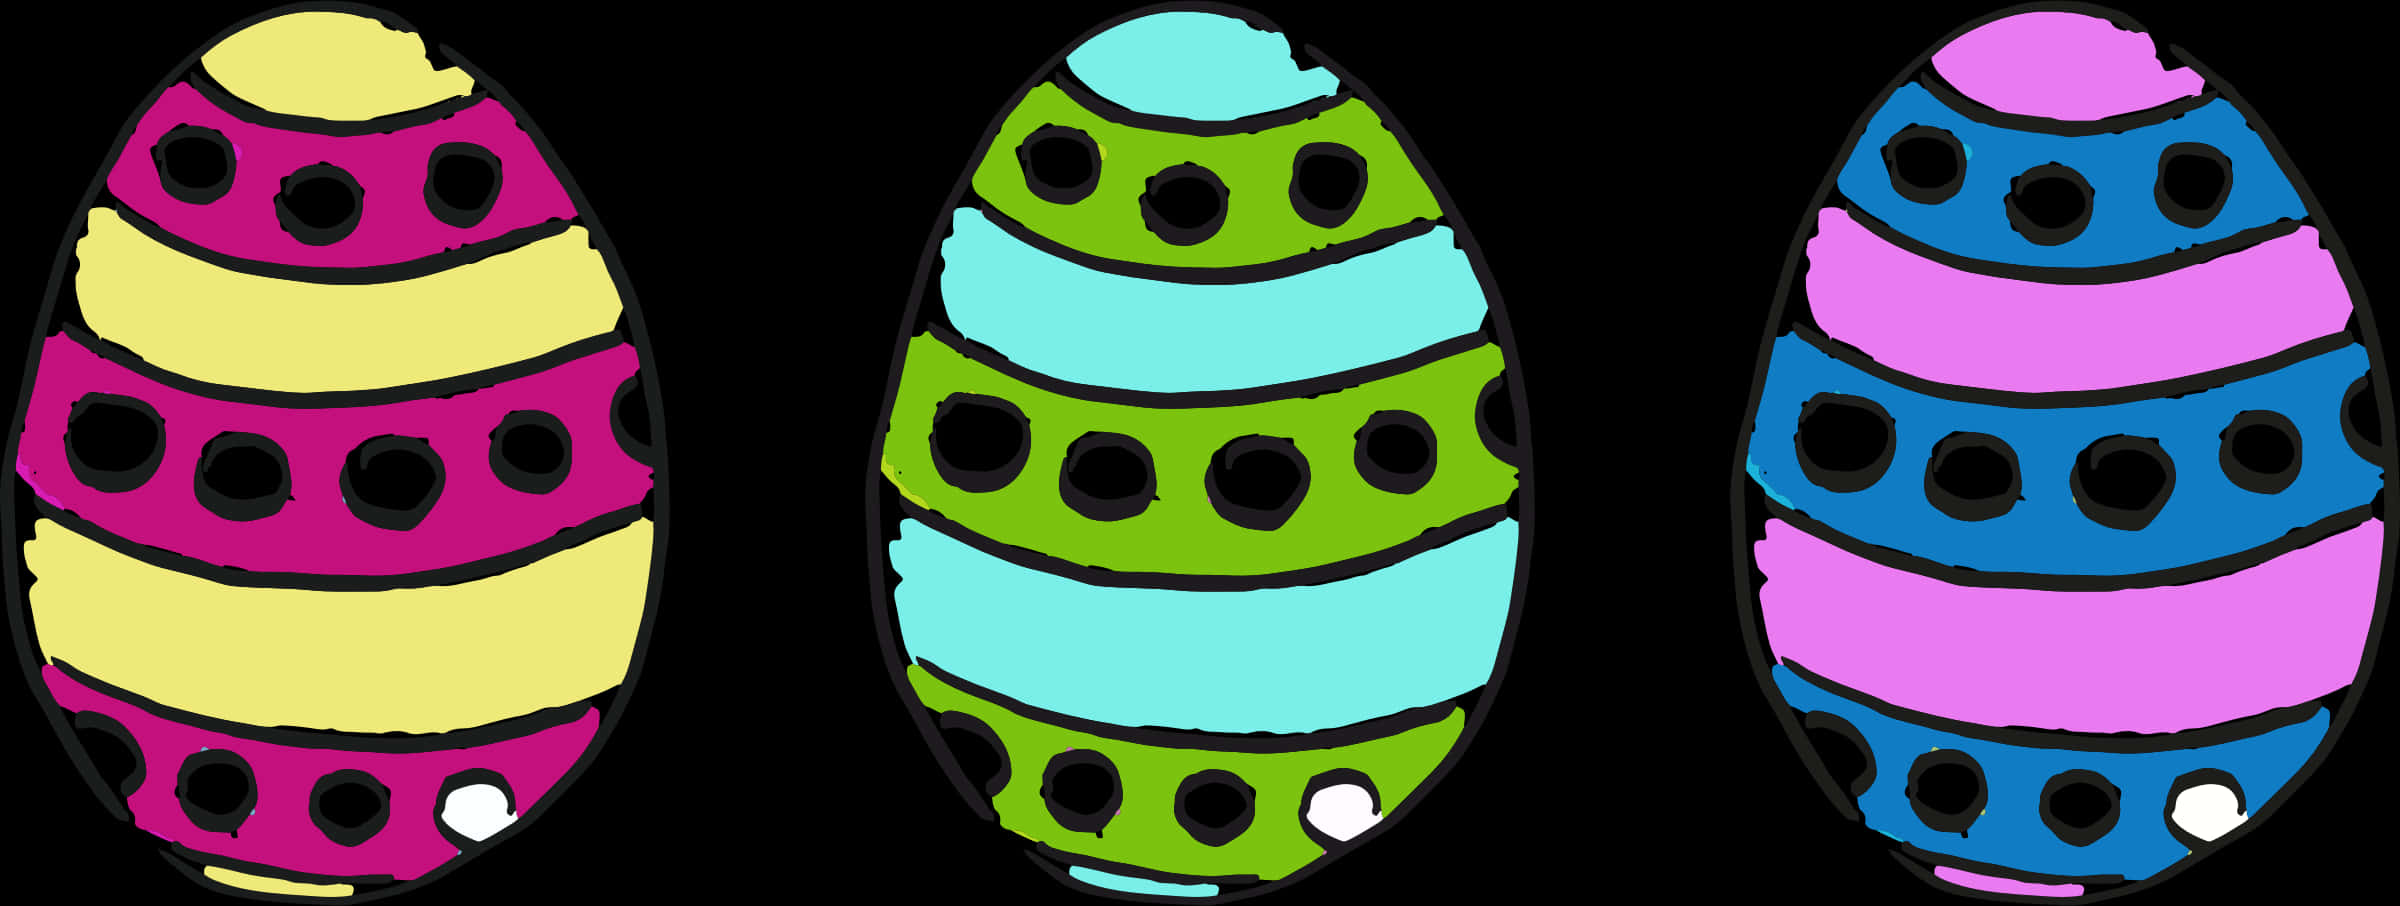 A Blue And Green Egg With Black Background